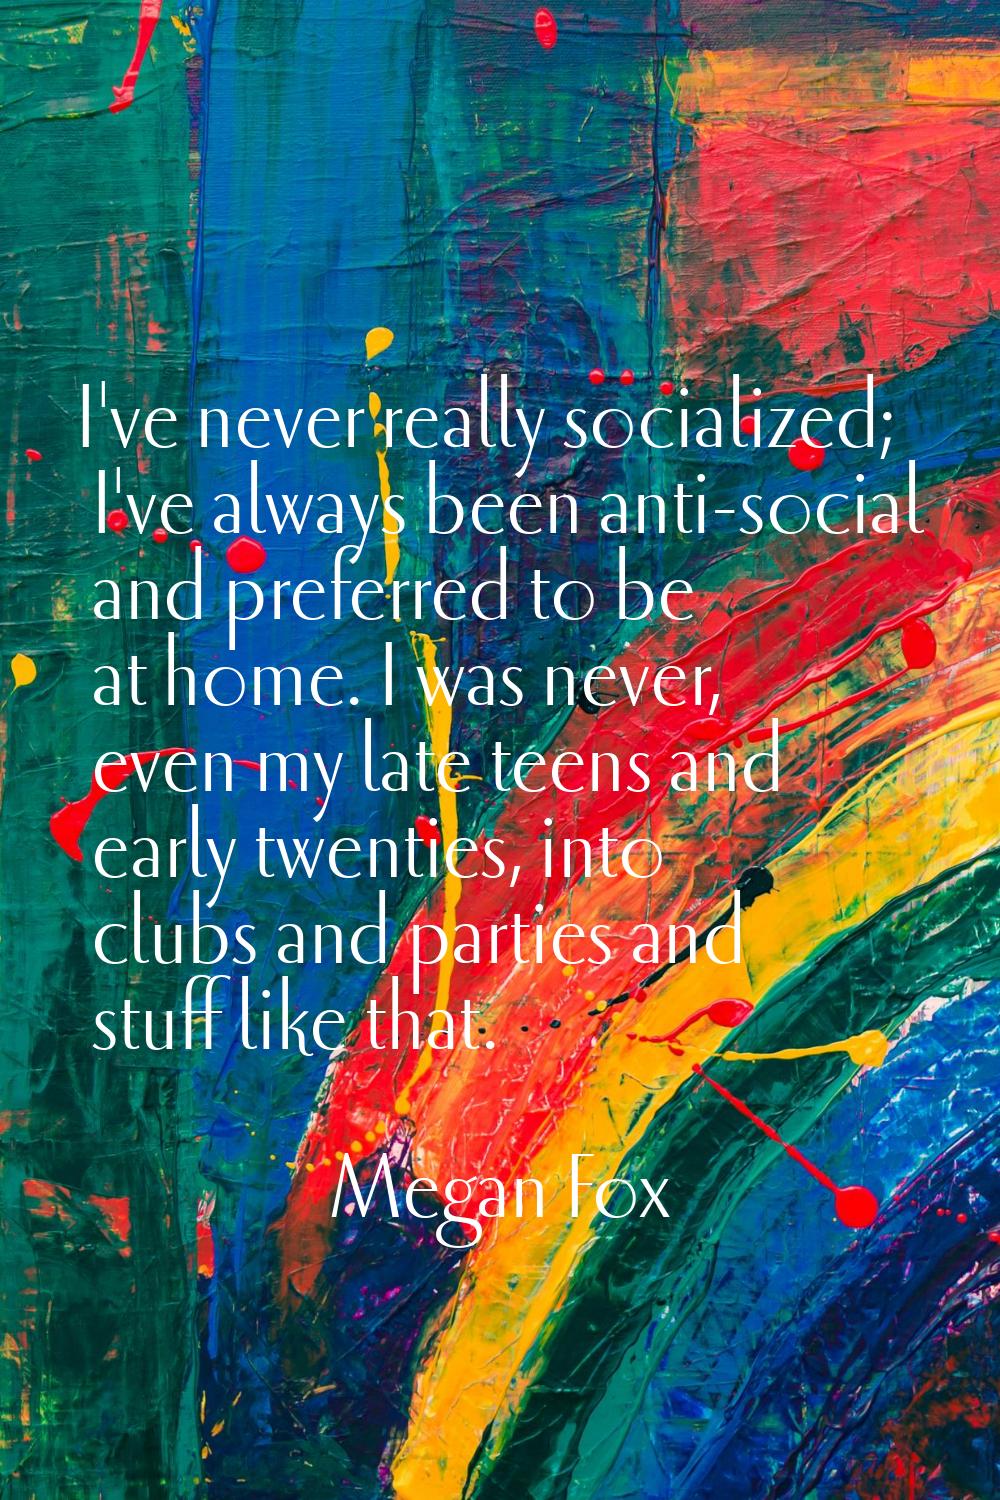 I've never really socialized; I've always been anti-social and preferred to be at home. I was never